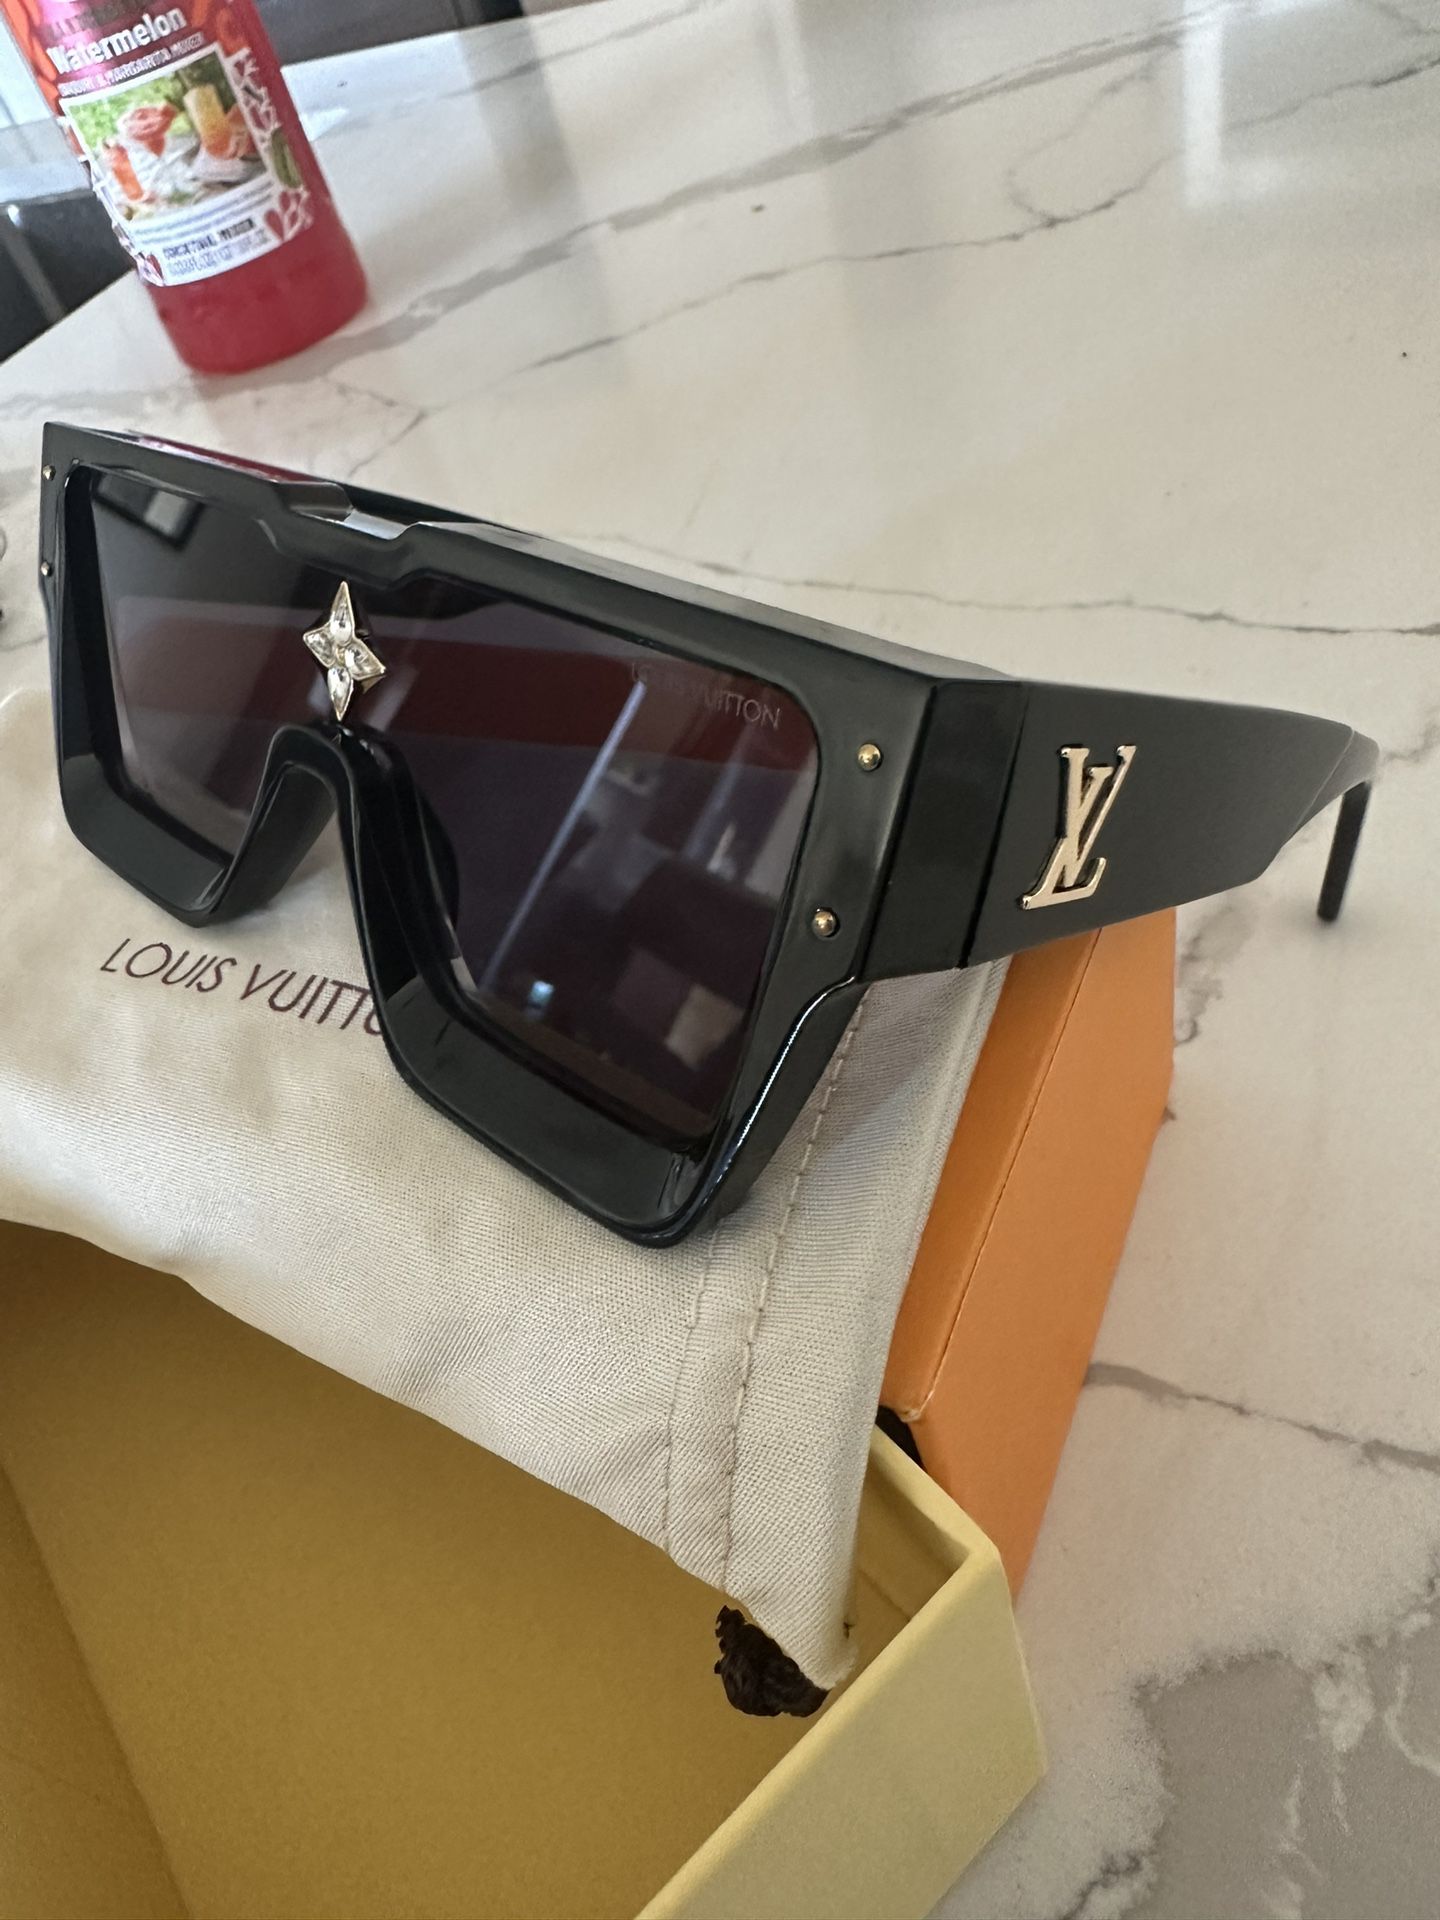 LV Louis Vuitton Cyclone Sunglasses for Sale in San Diego, CA - OfferUp